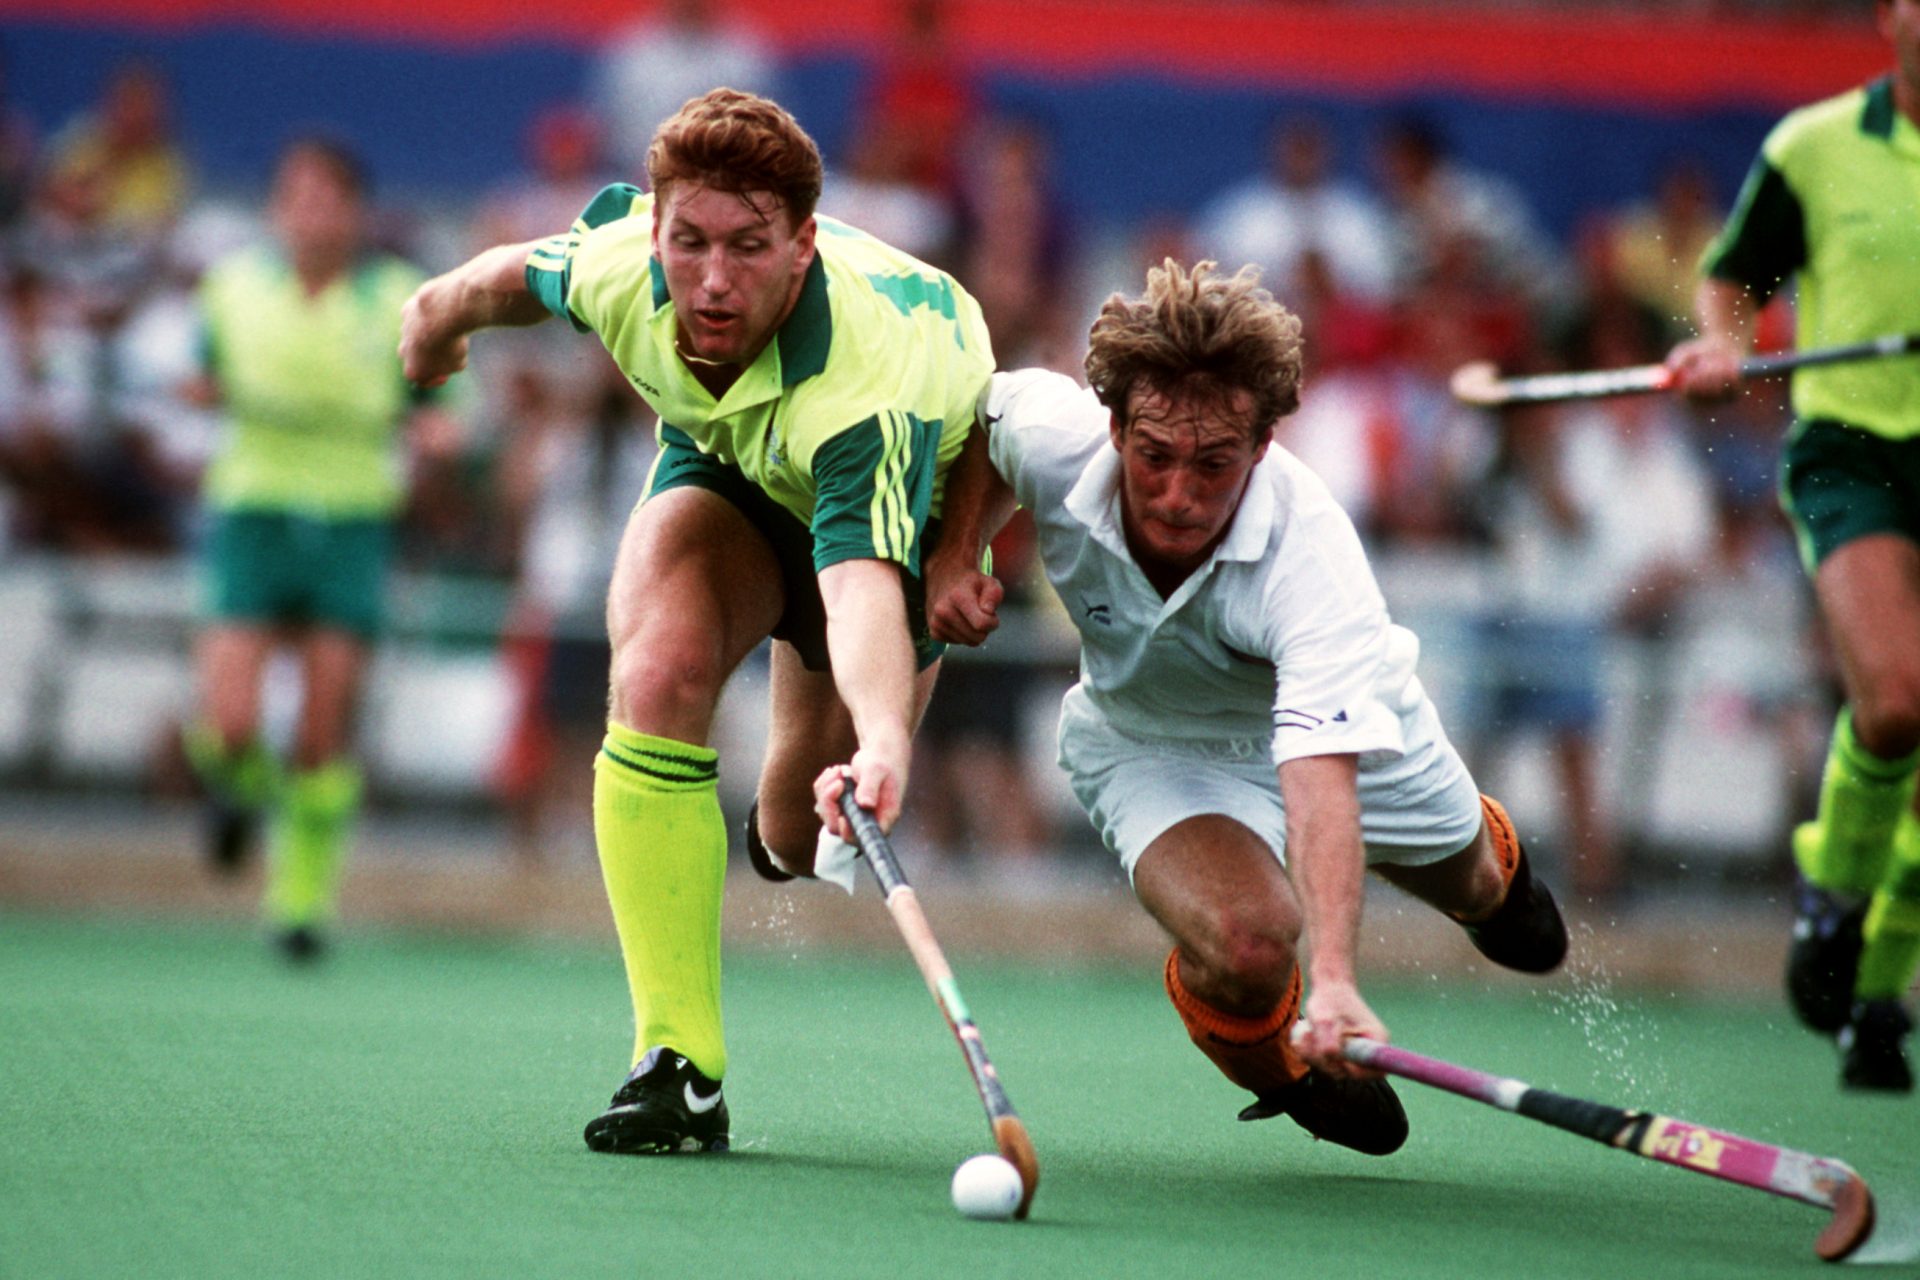 Which nation has won the most men’s field hockey golds?